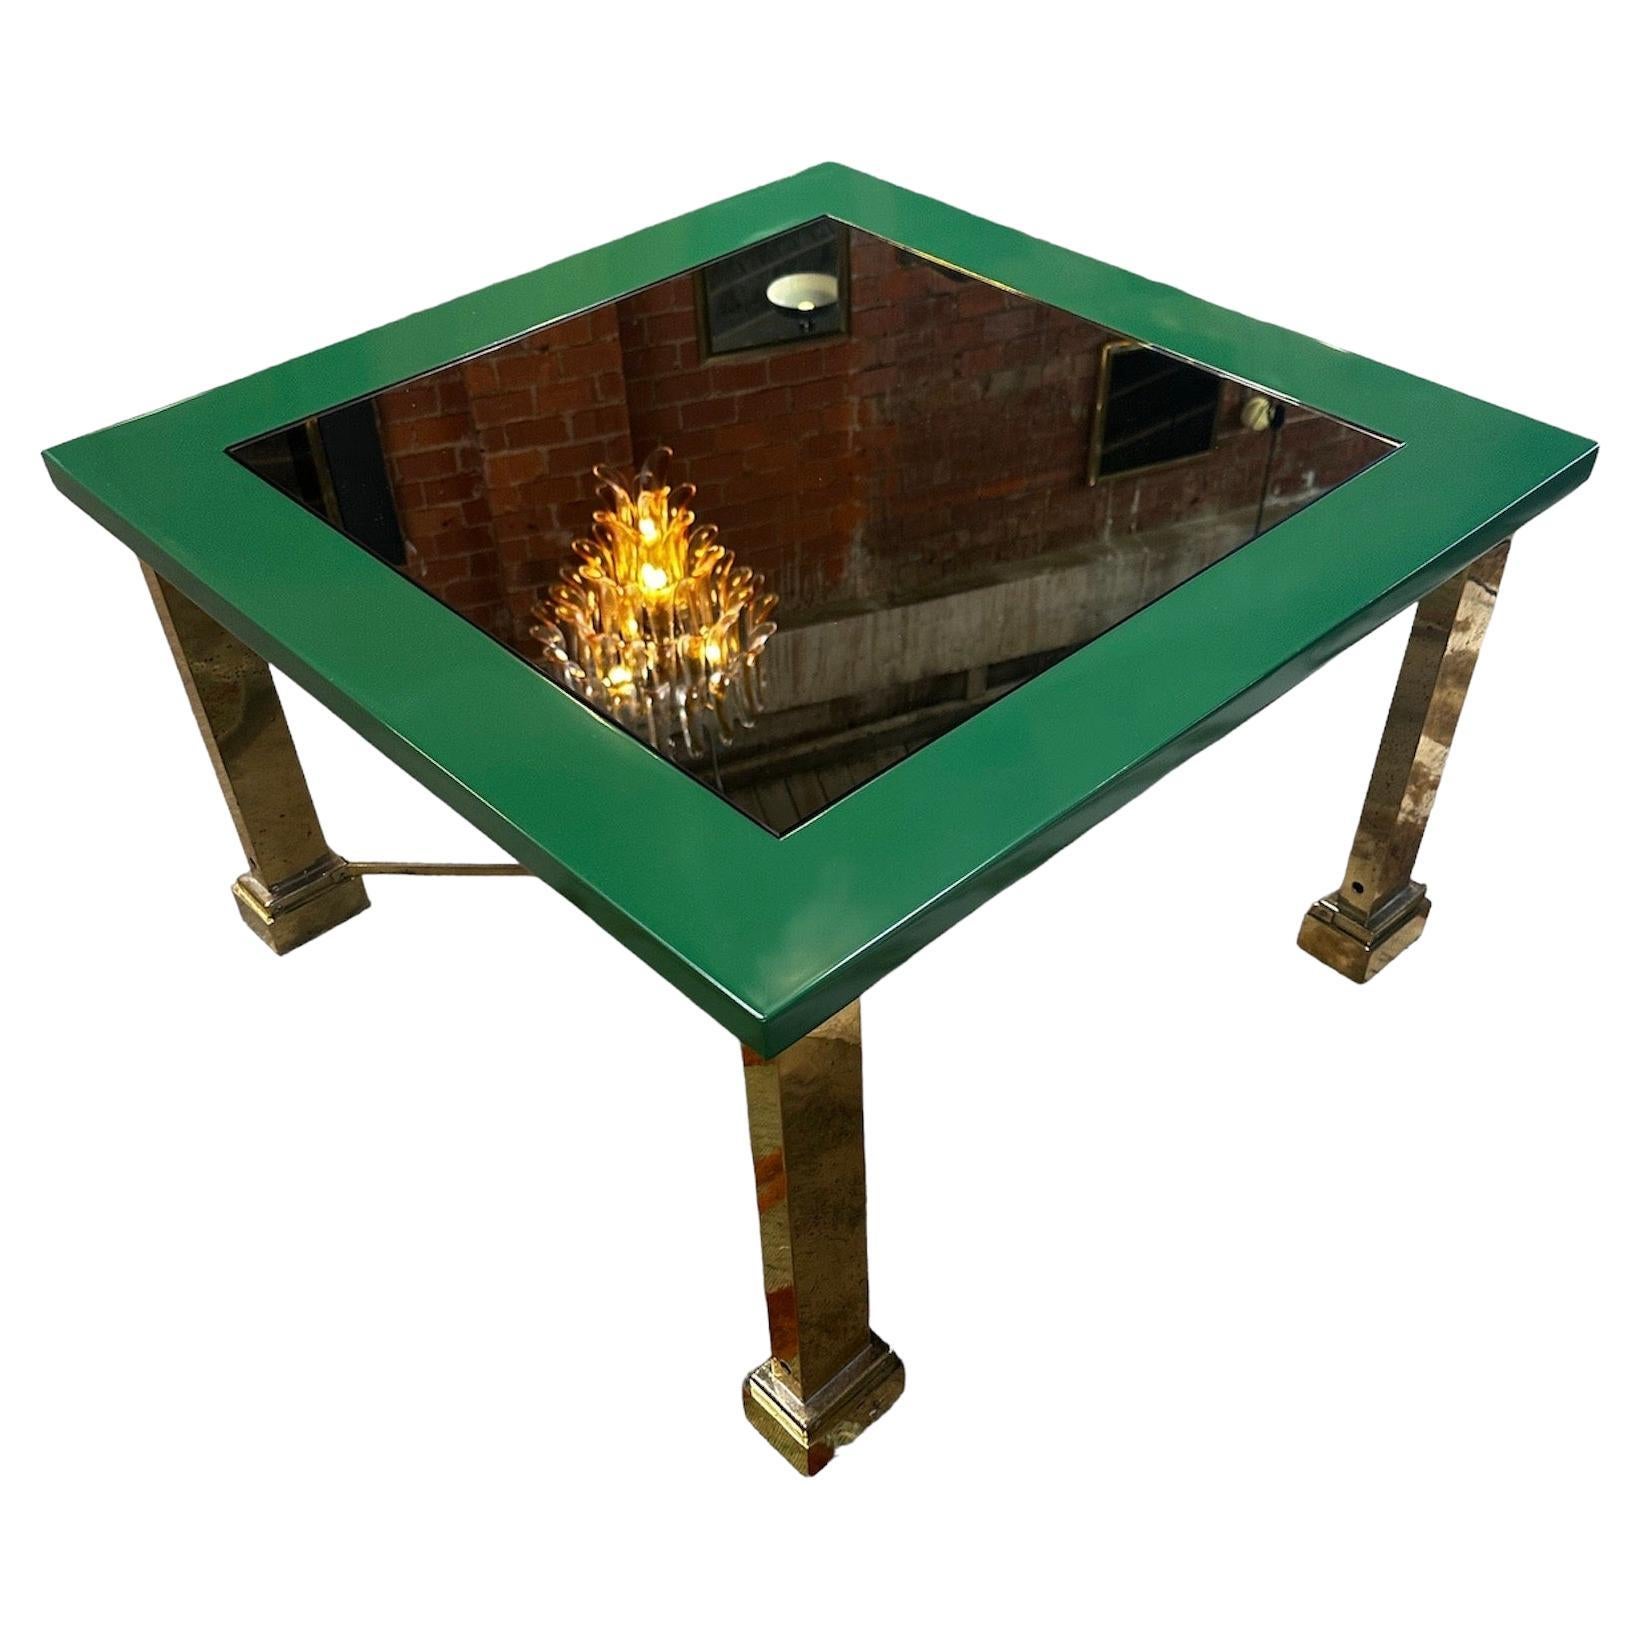 Midcentury Italian Green and Brass Coffee Table 1980s by Sergio Bucci For Sale